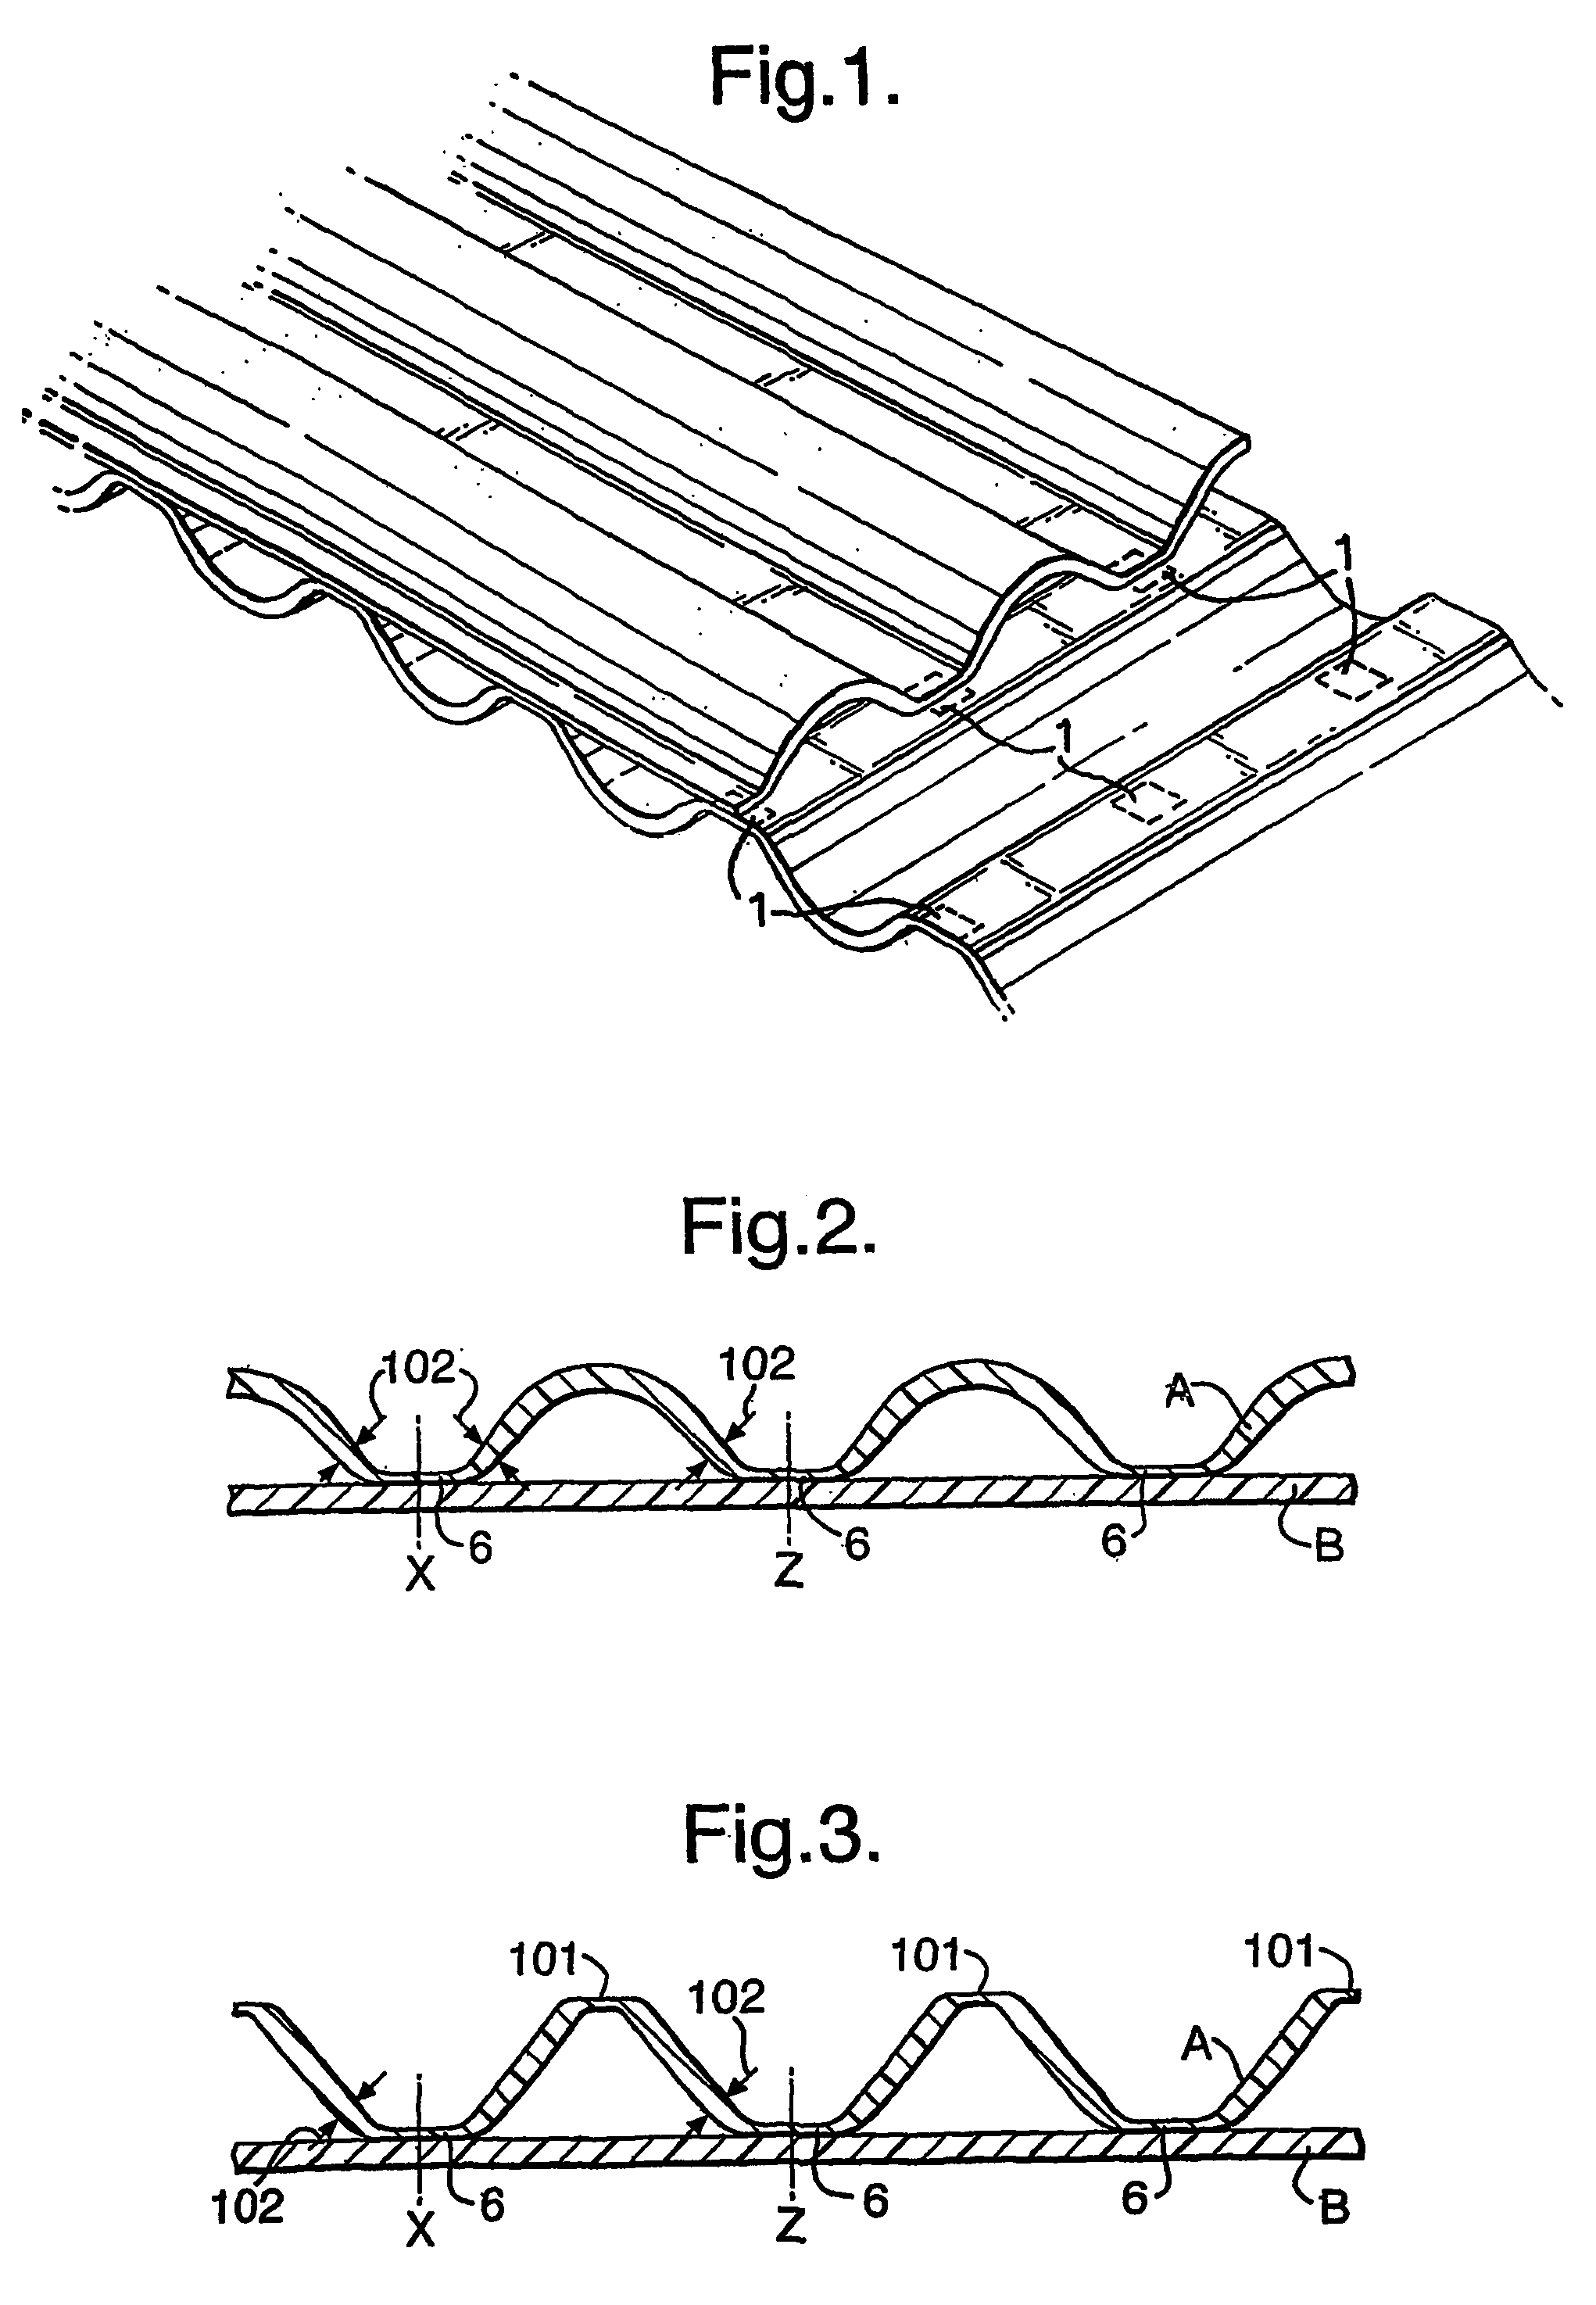 Laminates of films having improved resistance to bending in all directions and methods and apparatus for their manufacture